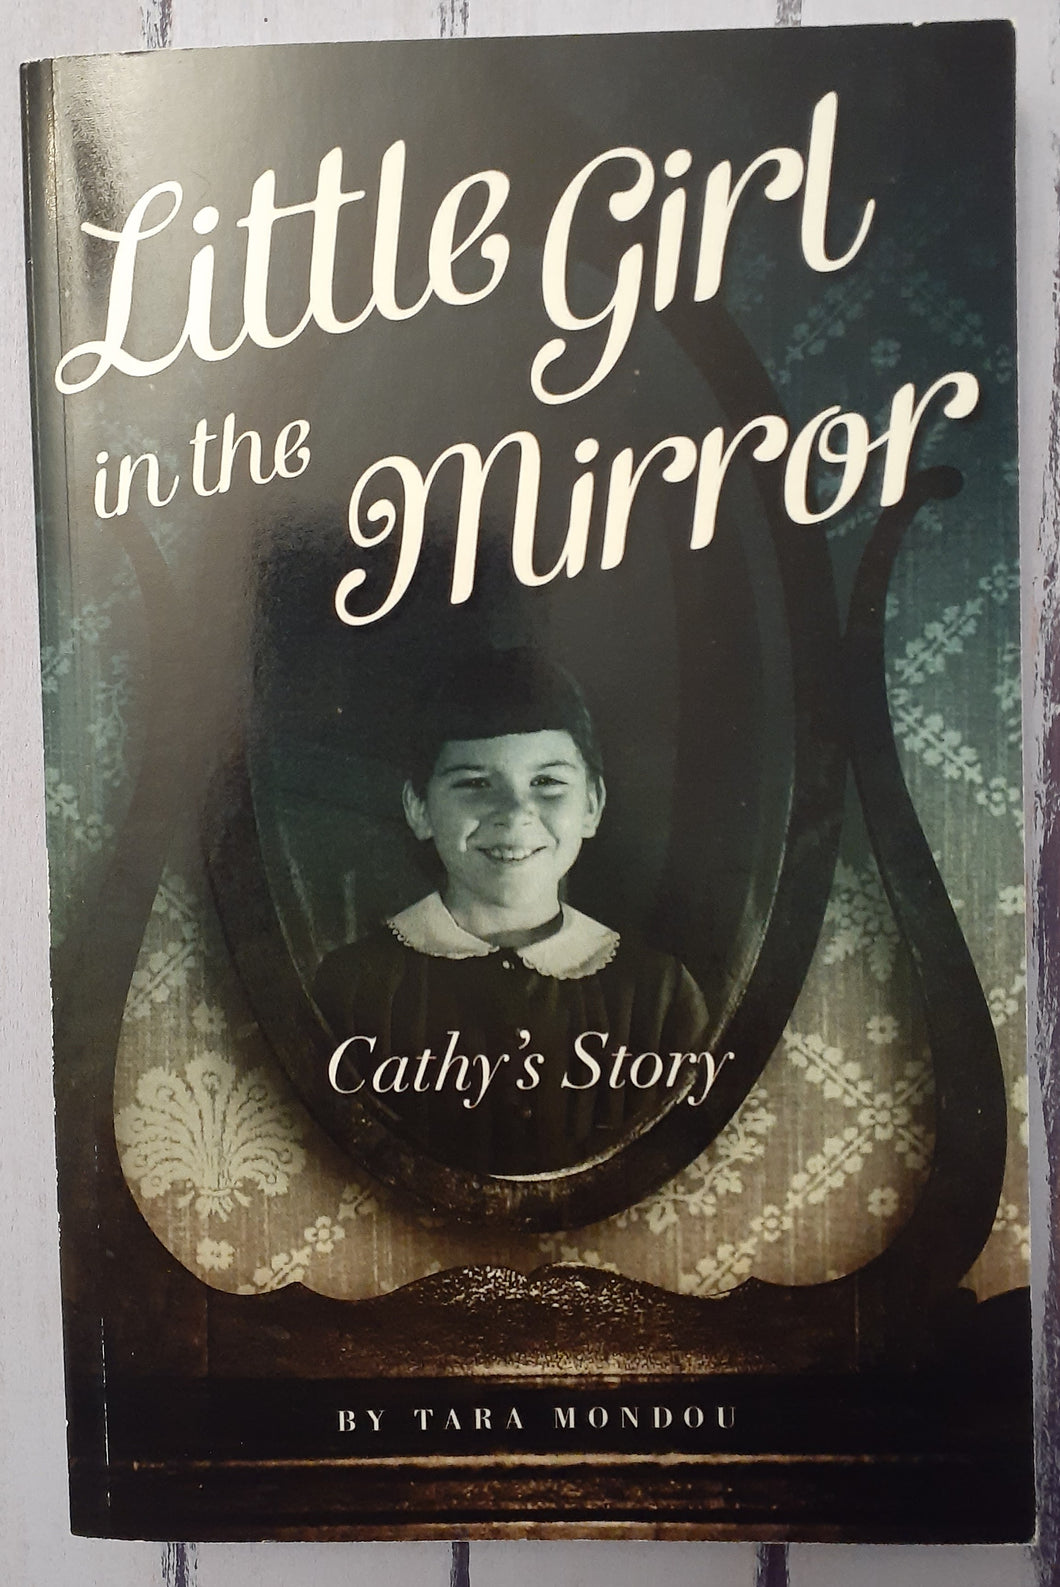 Little Girl in the Mirror - Cathy's Story